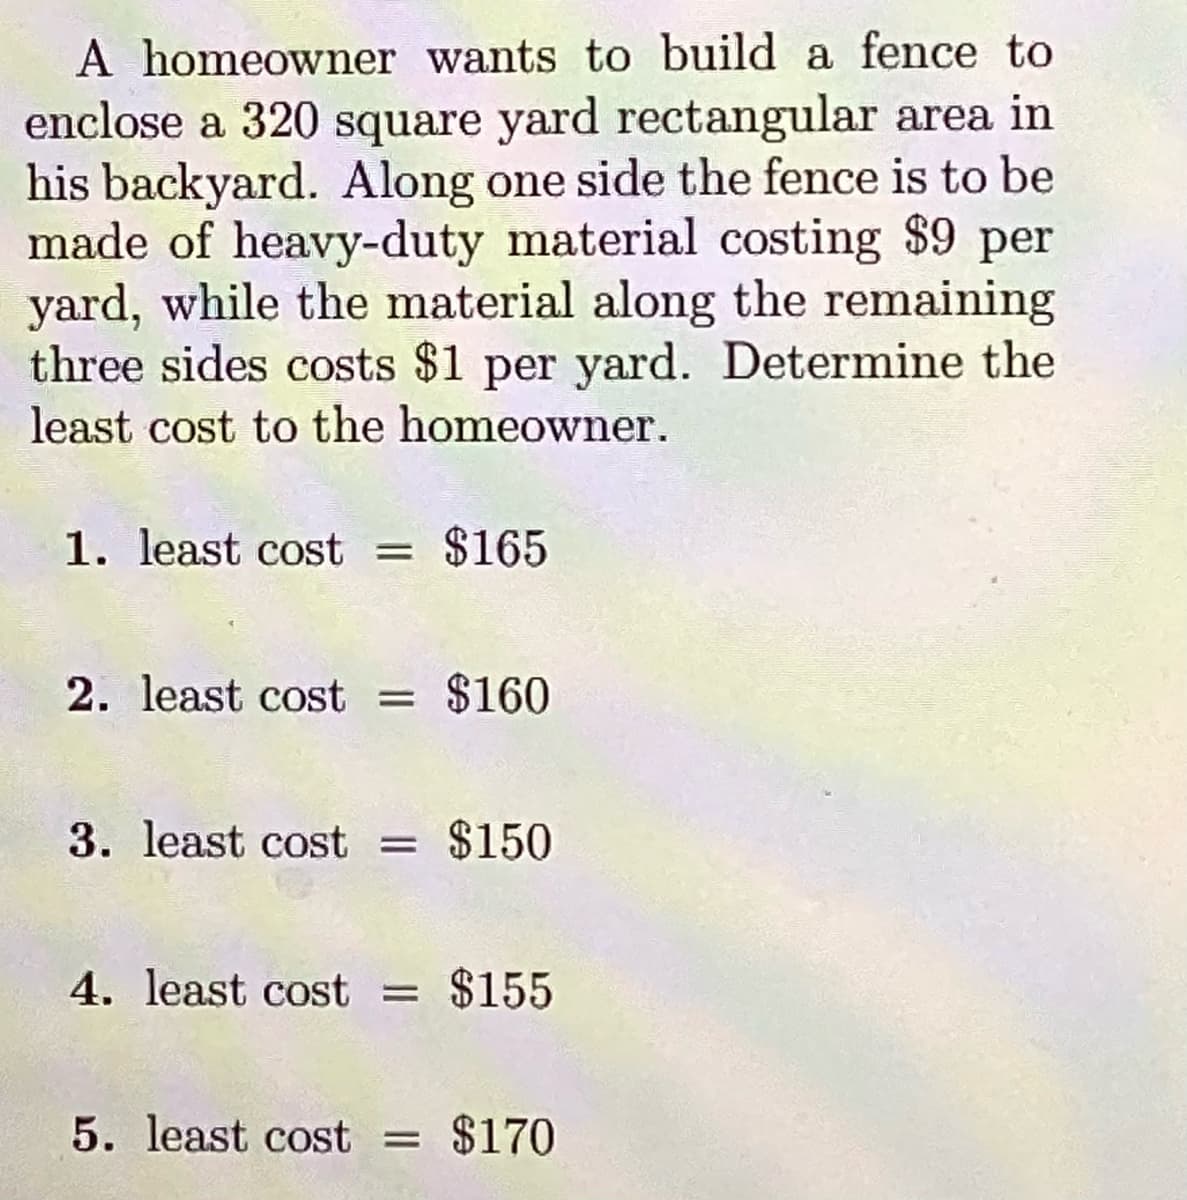 A homeowner wants to build a fence to
enclose a 320 square yard rectangular area in
his backyard. Along one side the fence is to be
made of heavy-duty material costing $9 per
yard, while the material along the remaining
three sides costs $1 per yard. Determine the
least cost to the homeowner.
1. least cost
$165
2. least cost = $160
3. least cost = $150
4. least cost = $155
5. least cost = $170